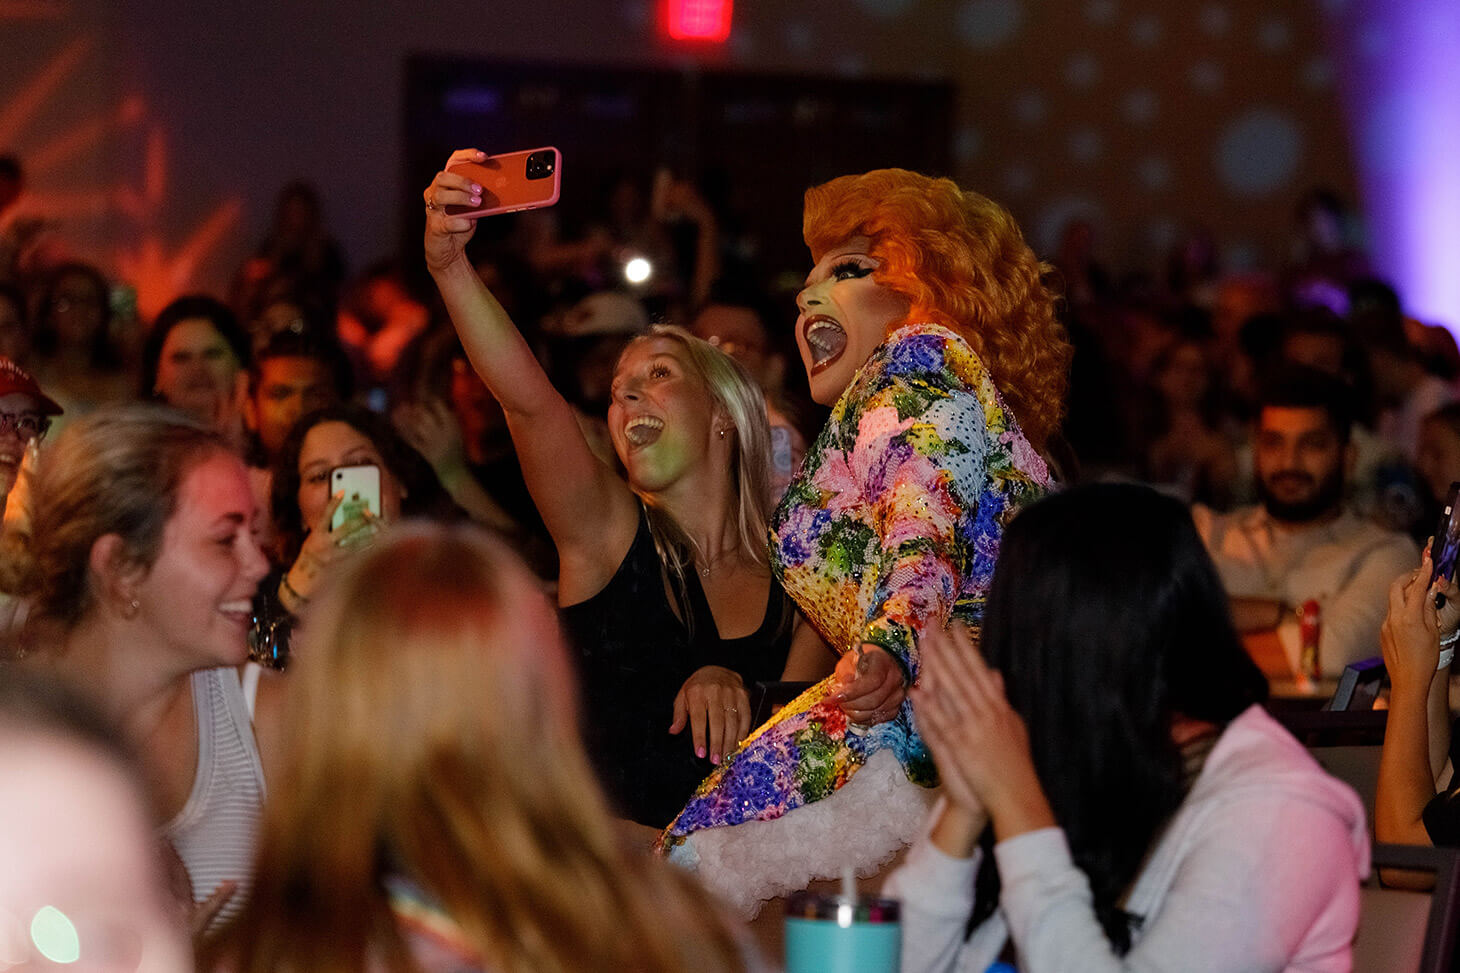 Student taking a selfie with one of the performers at Drag Queen Bingo.